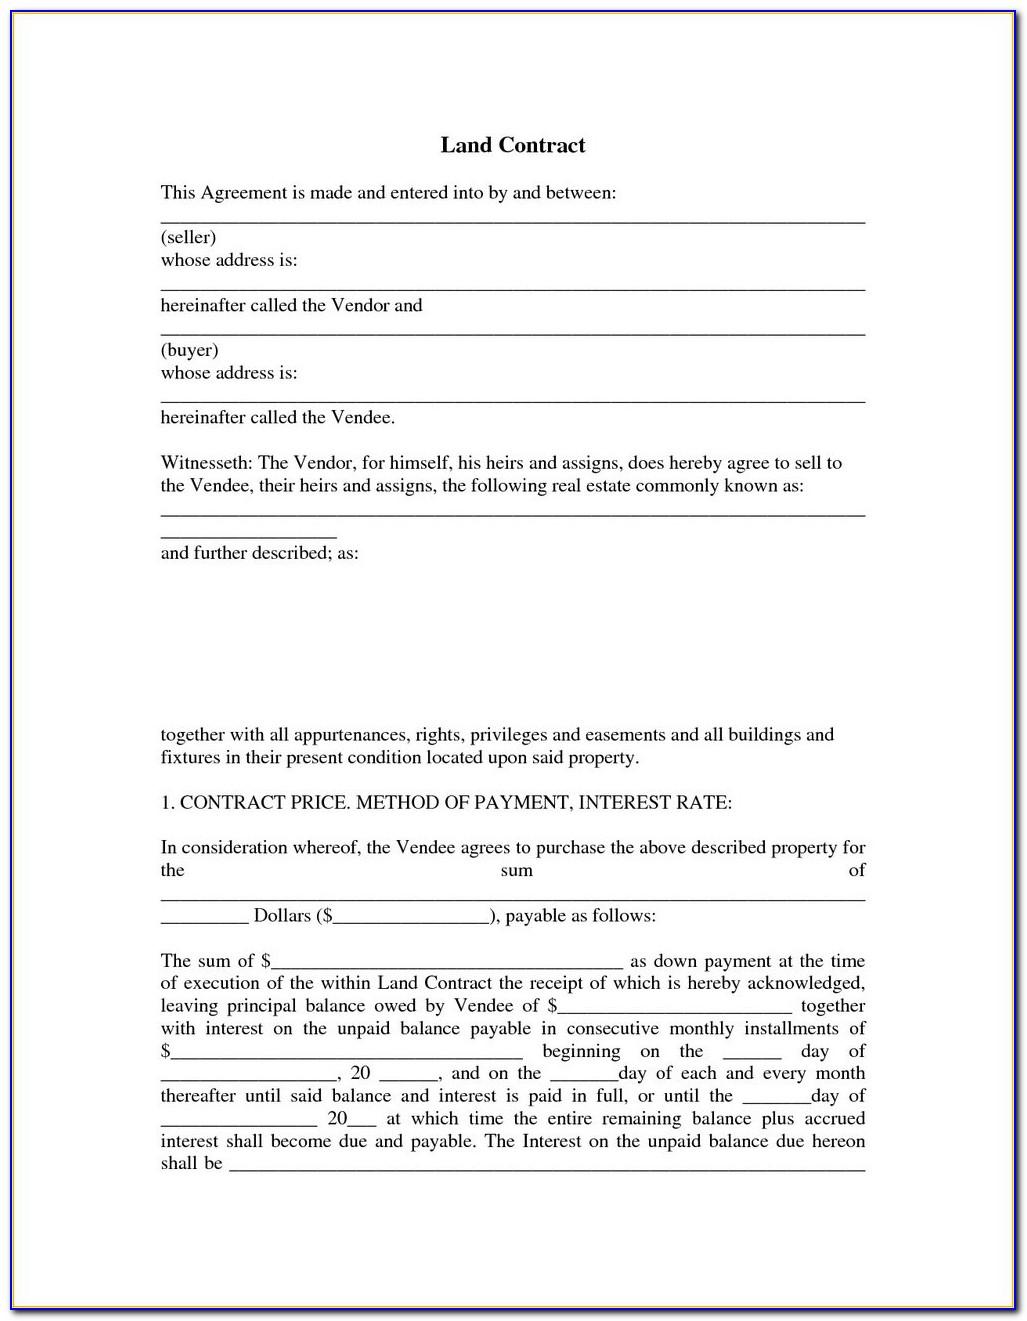 Land Sale Contract Form